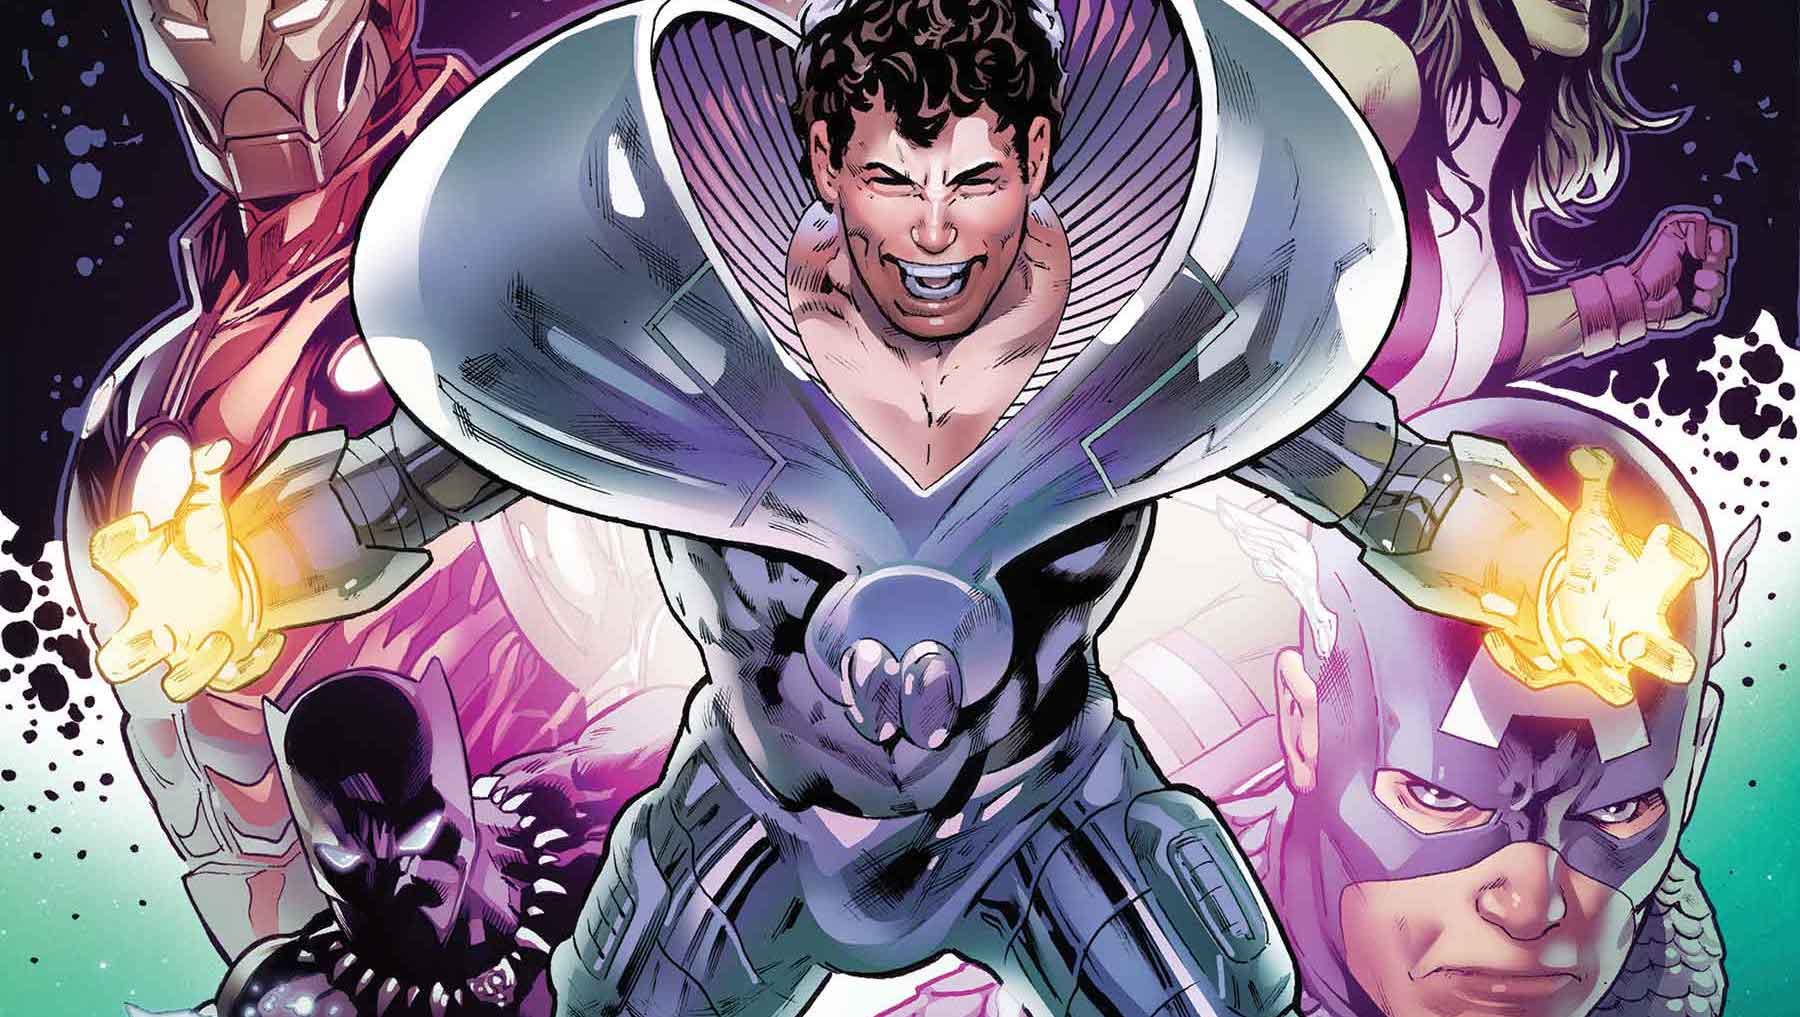 'Avengers Beyond' #1 establishes the Lost One as the next universe ending villain